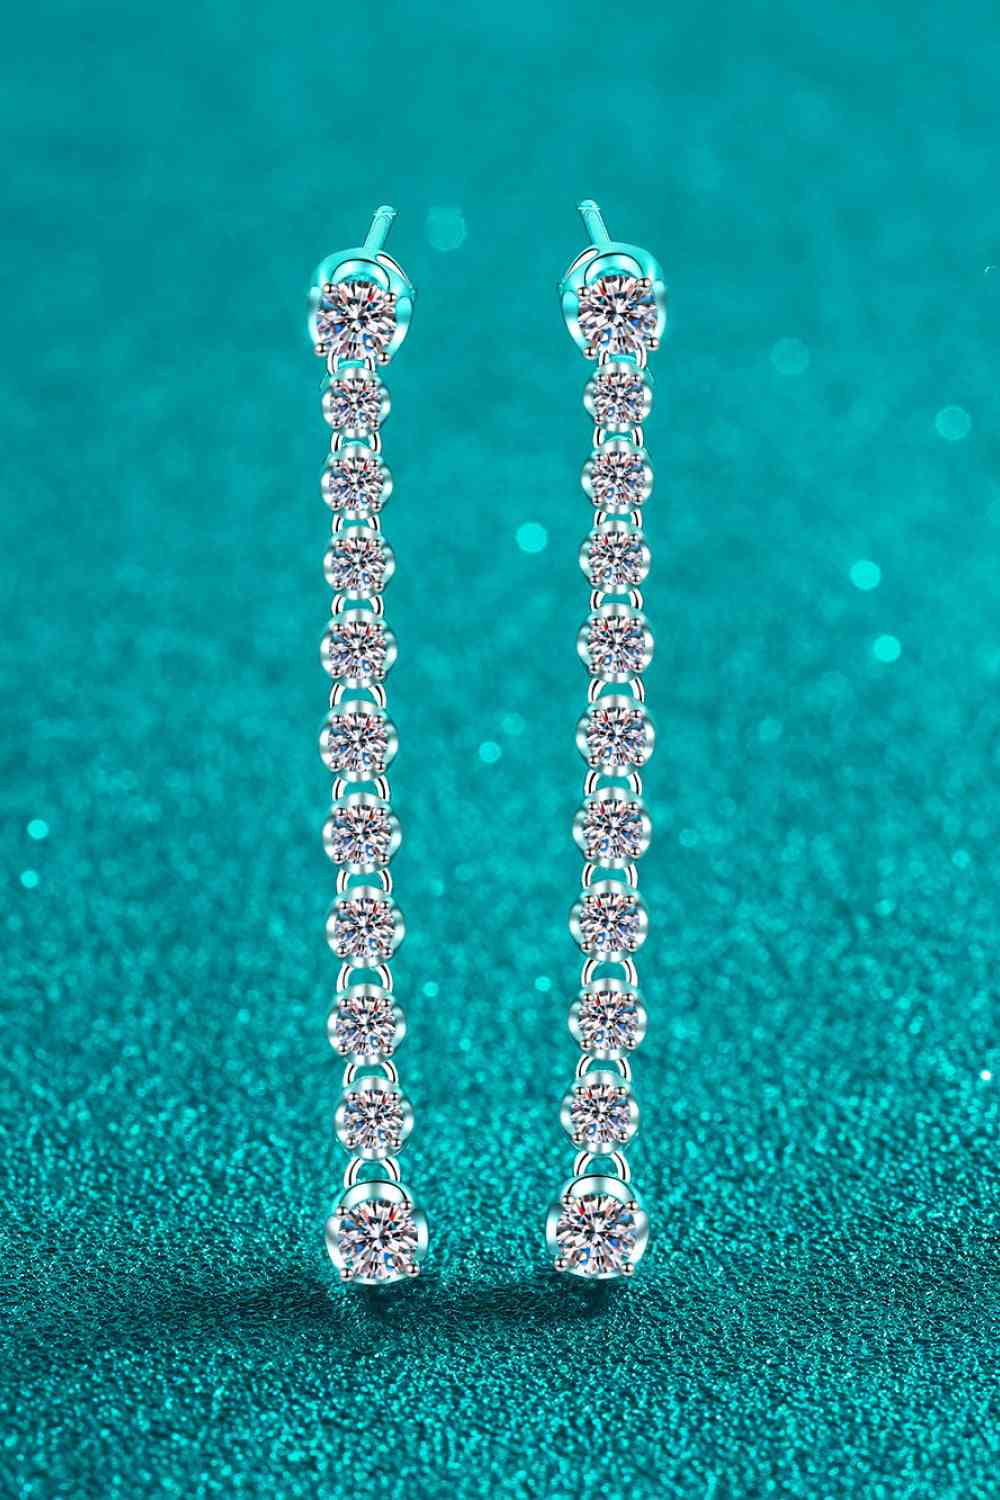 a pair of diamond earrings on a blue background